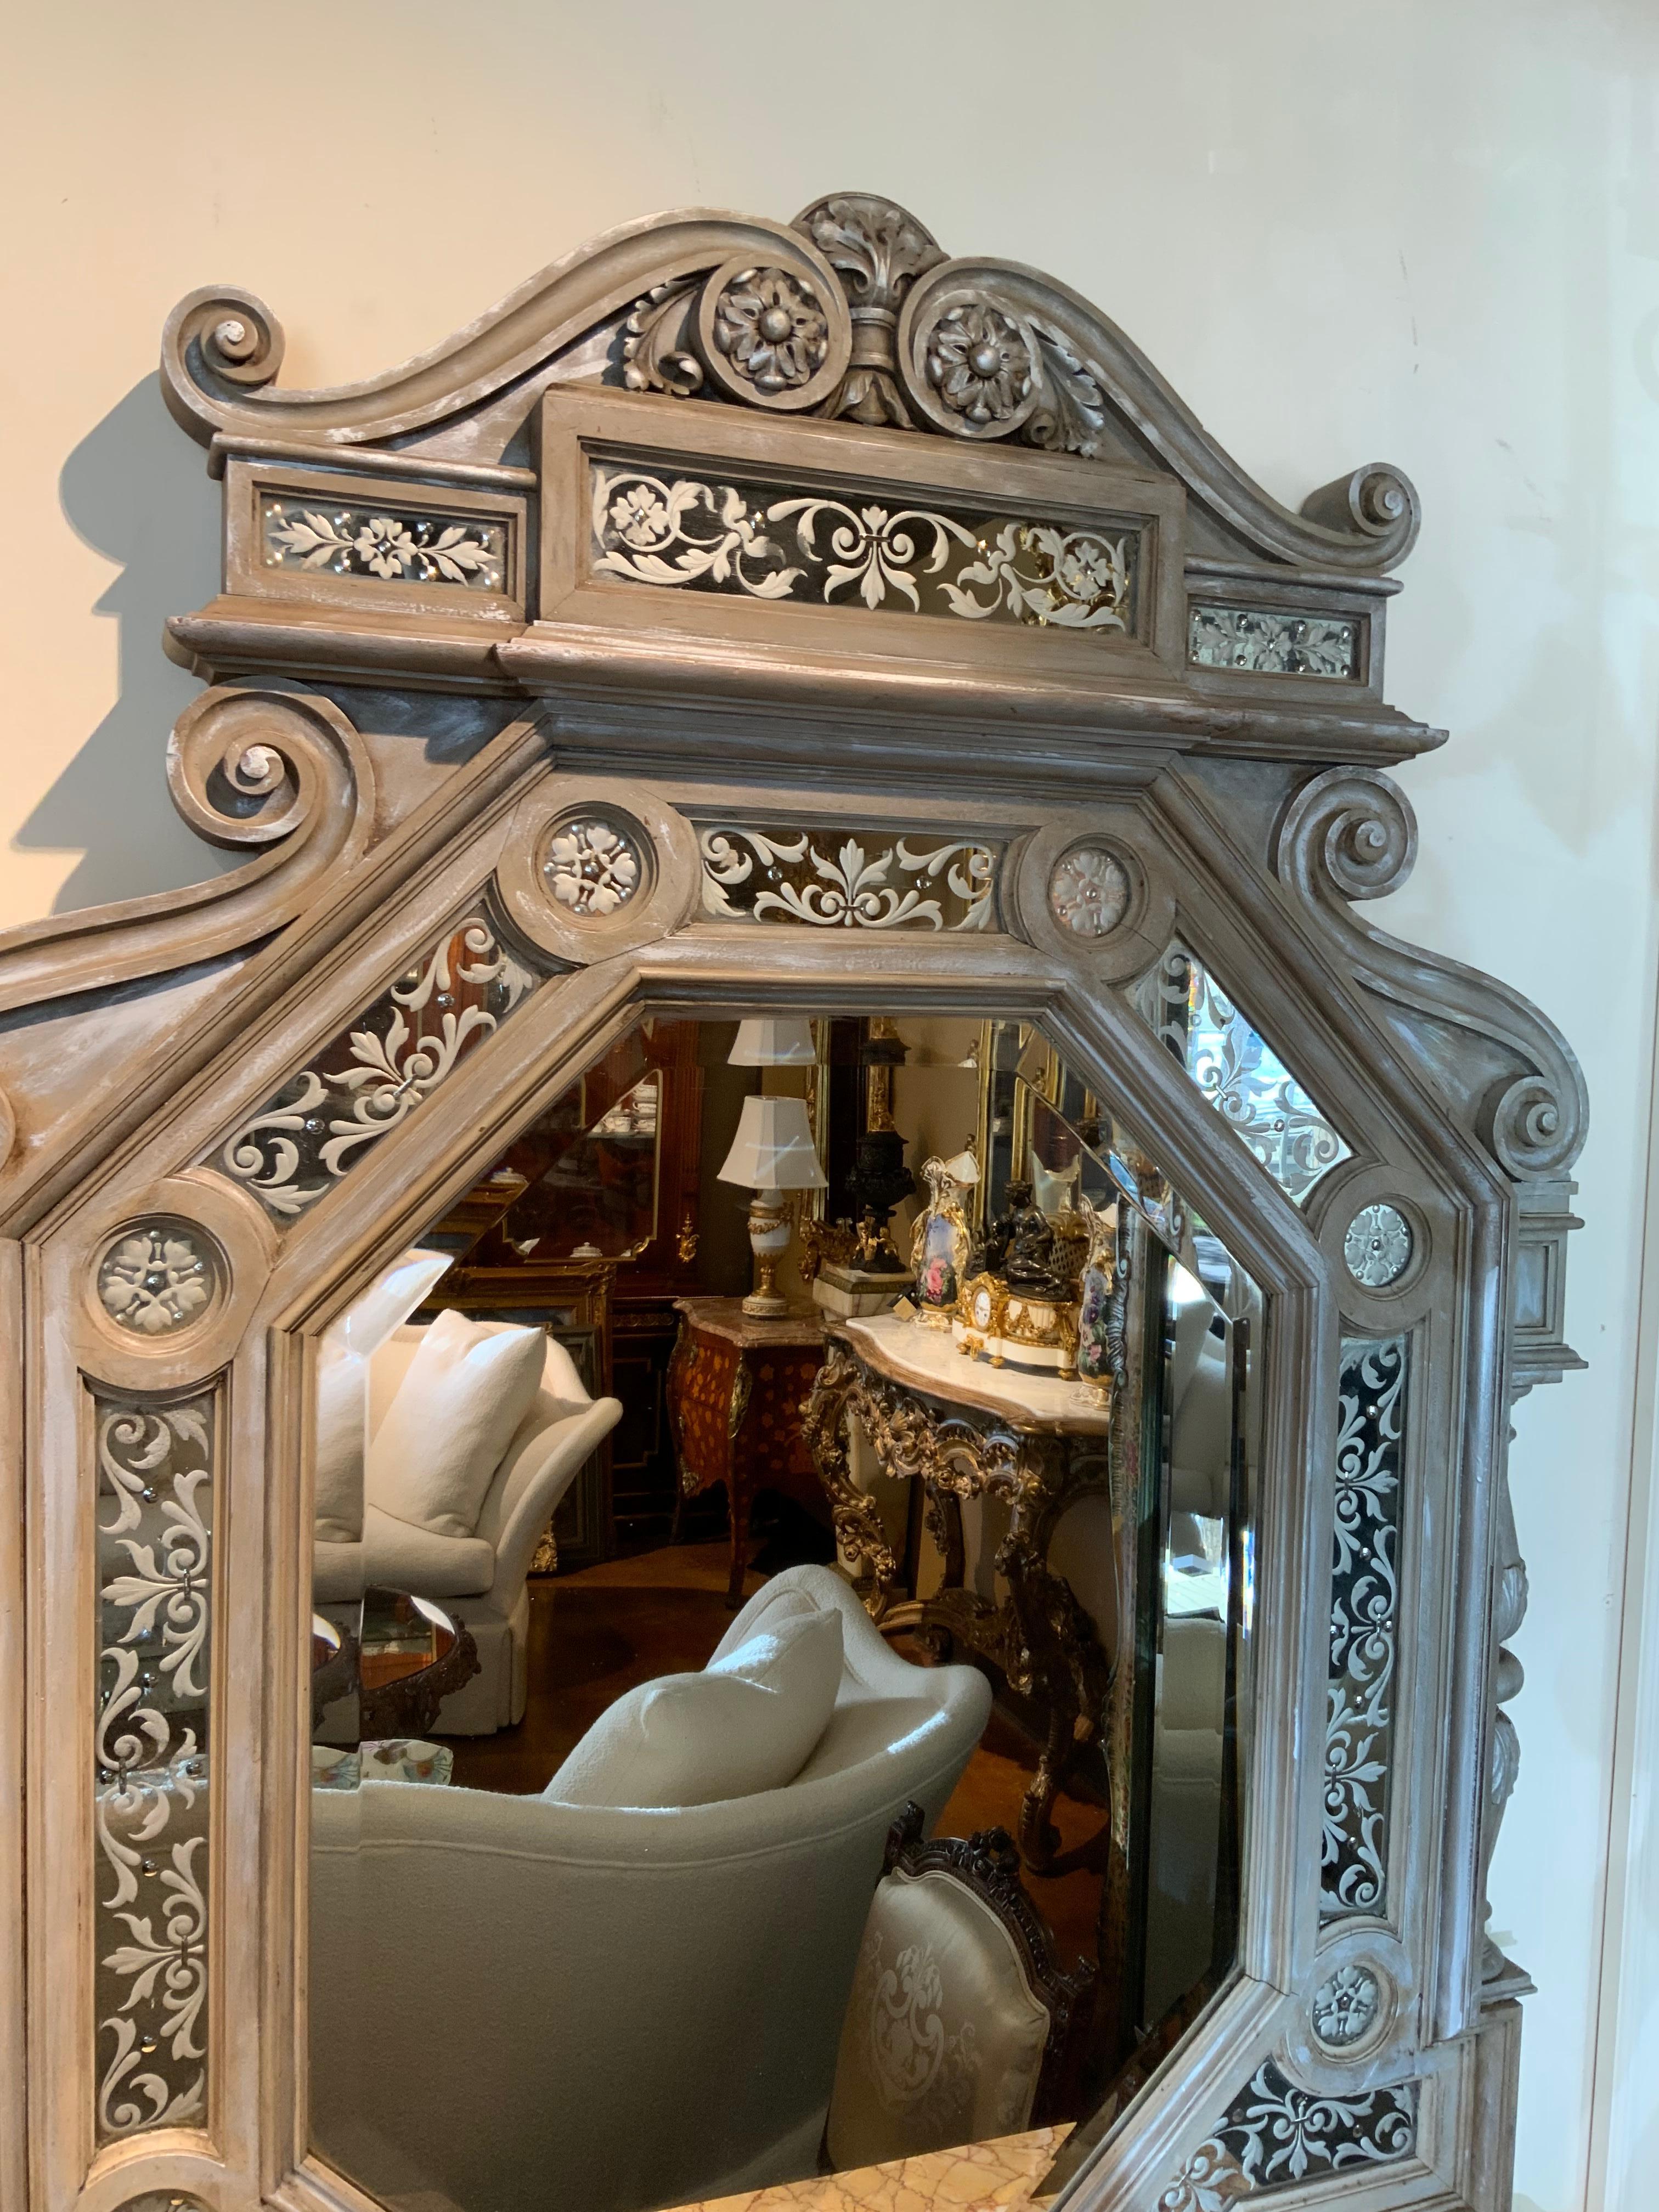 A very special look in a grisalle hue with silver highlights 
Make this piece appealing. It is deeply paneled to give it
Depth and inlaid mirrors are etched in a beautiful swirl design. 
Carved posts on each side have detail carving. A cartouche